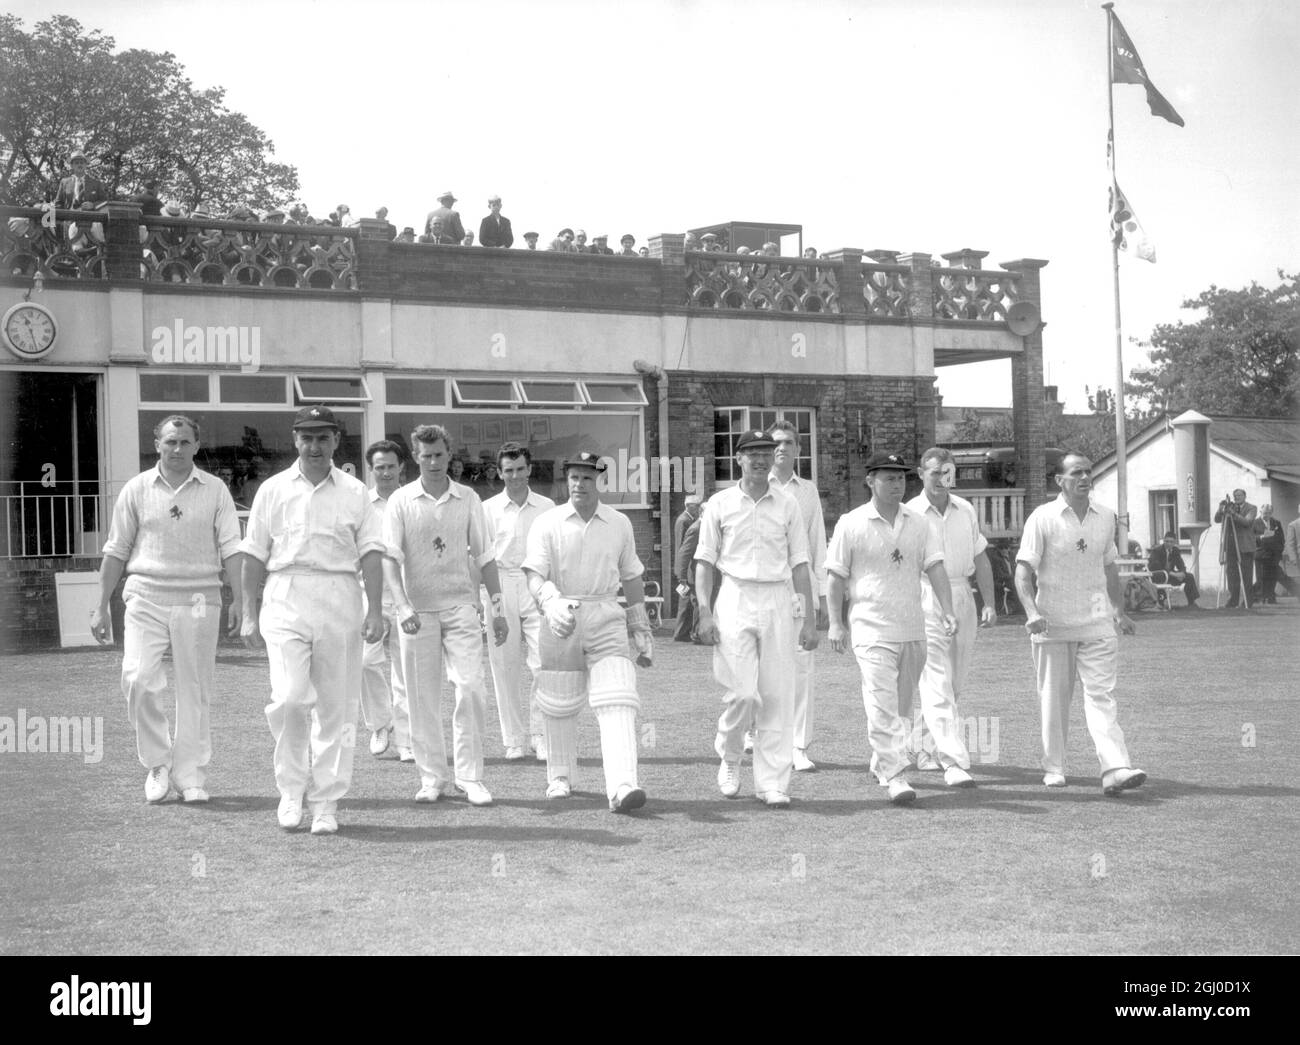 Colin Cowdrey leads the Kent side out to the field against Yorkshire. The players were L-R: D.J. Halfyard, Colin Cowdrey, S.E. Leary, P.H. Jones, R.W. Wilkinson, A.W. Catt, A.L. Dixon, A. Brown, R.C. Wilson, P.E. Richardson and F. Ridgeway. 25th May 1960. Stock Photo